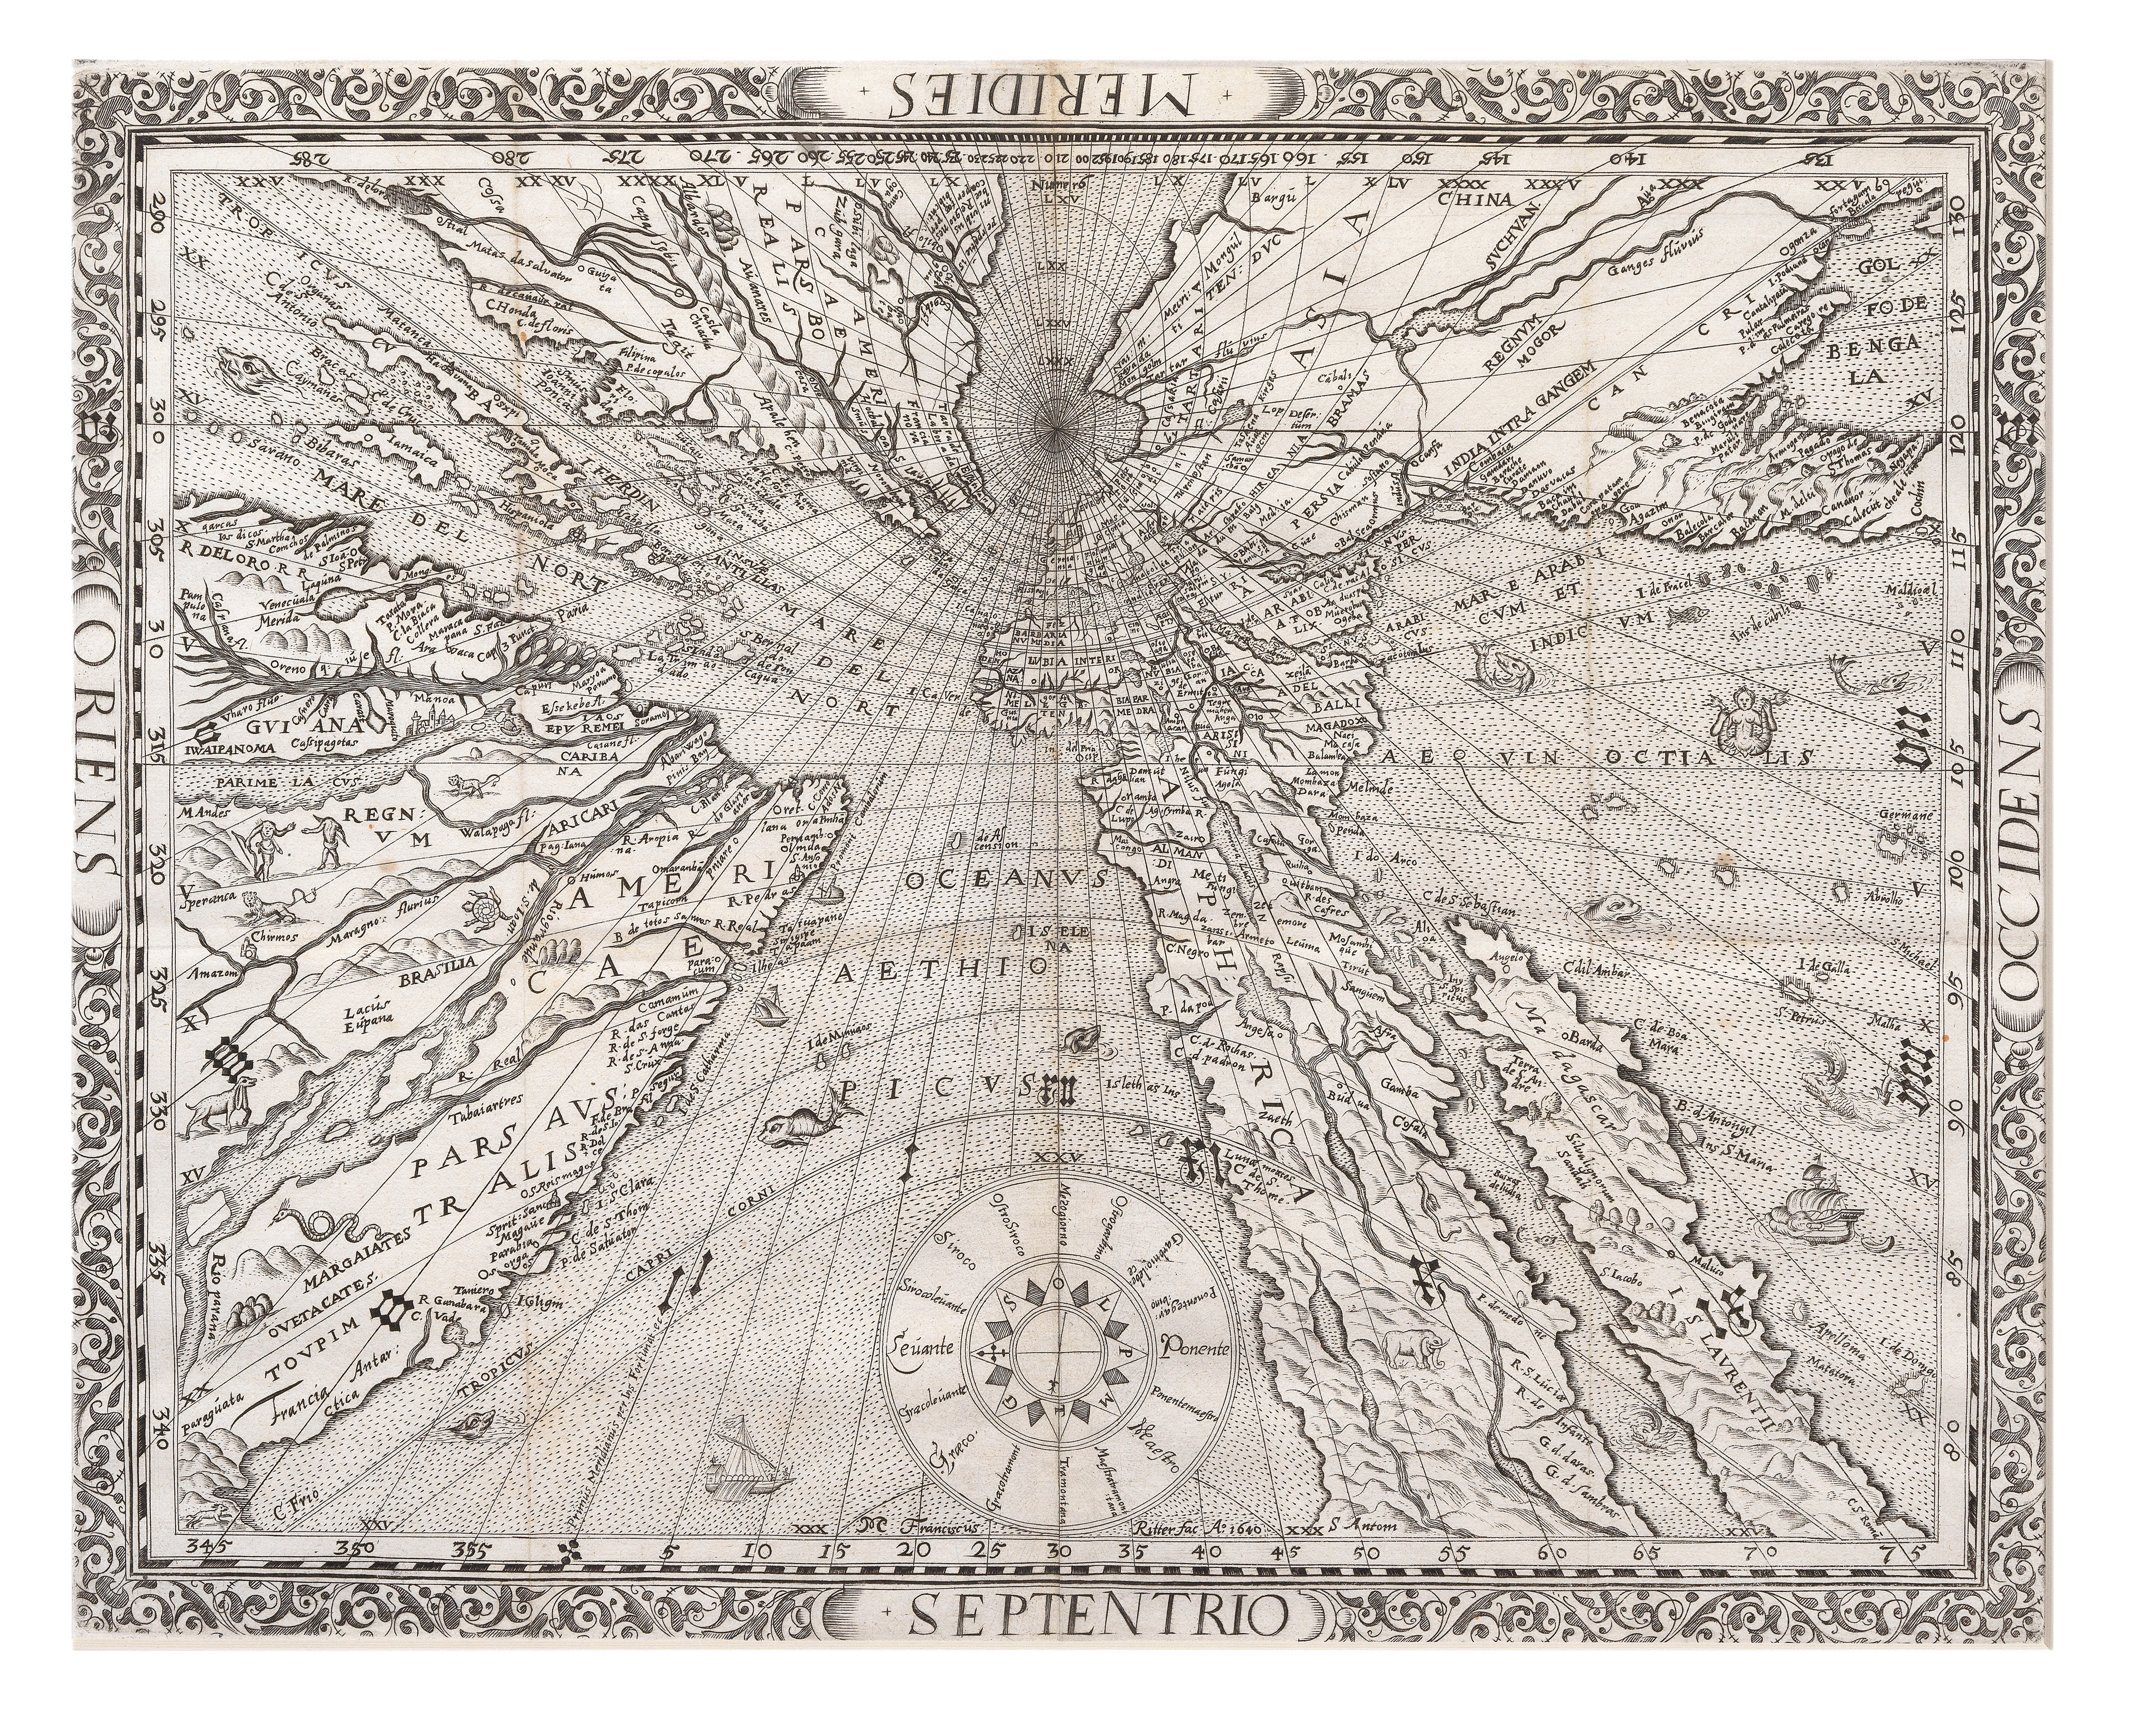 Franz Ritter's sundial map or gnomoic projection, centred on the North Pole